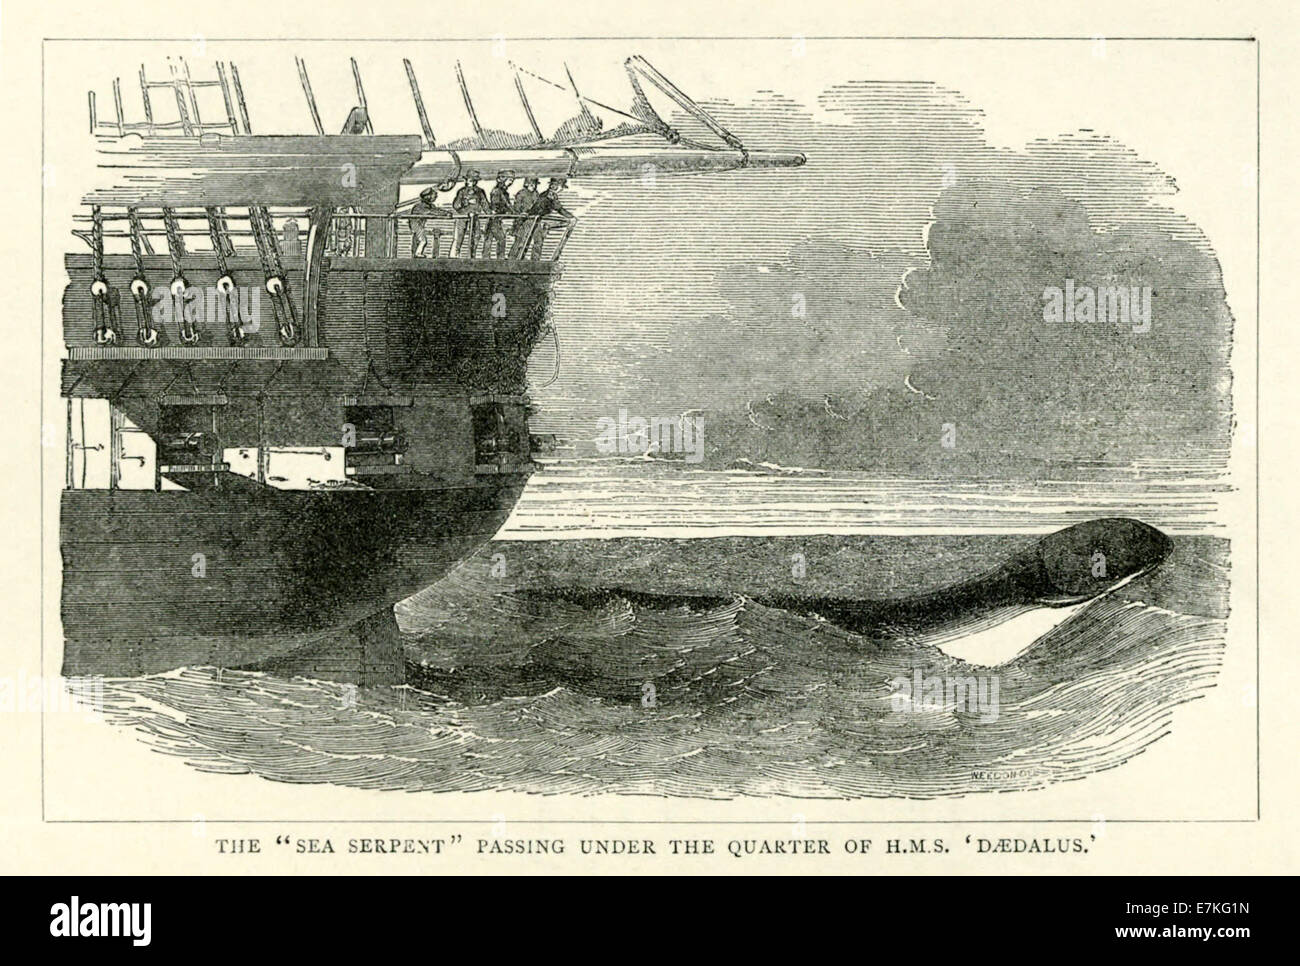 The Great Sea serpent seen from HMS Daedalus on 6 August 1848 passing under the quarter. See description for more information. Stock Photo